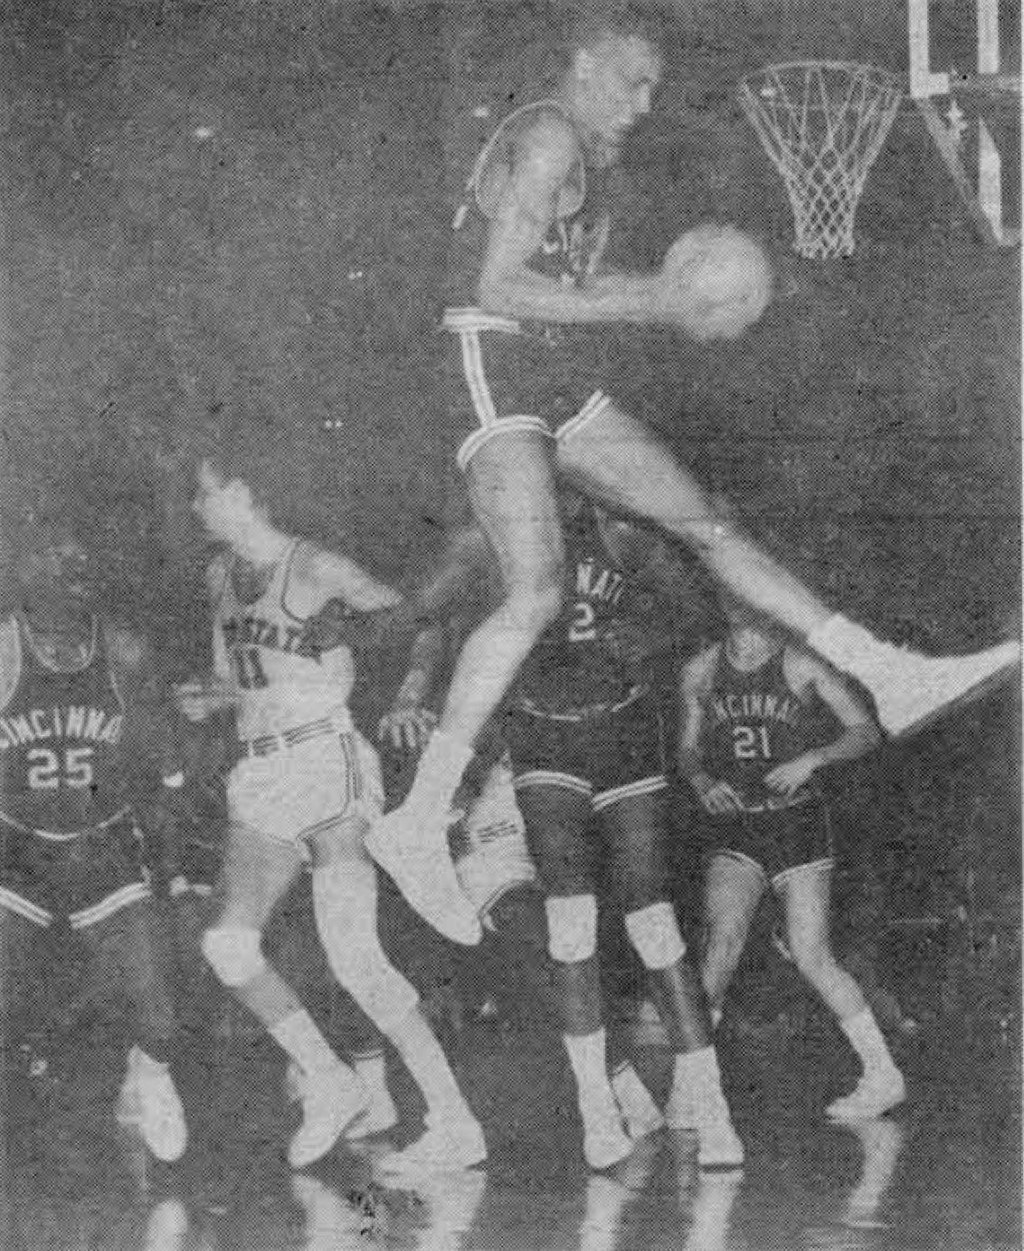 George Wilson was part of the Cincinnati Bearcats team that won the NCAA Division I men’s basketball tournament in 1962 ©Bearcats